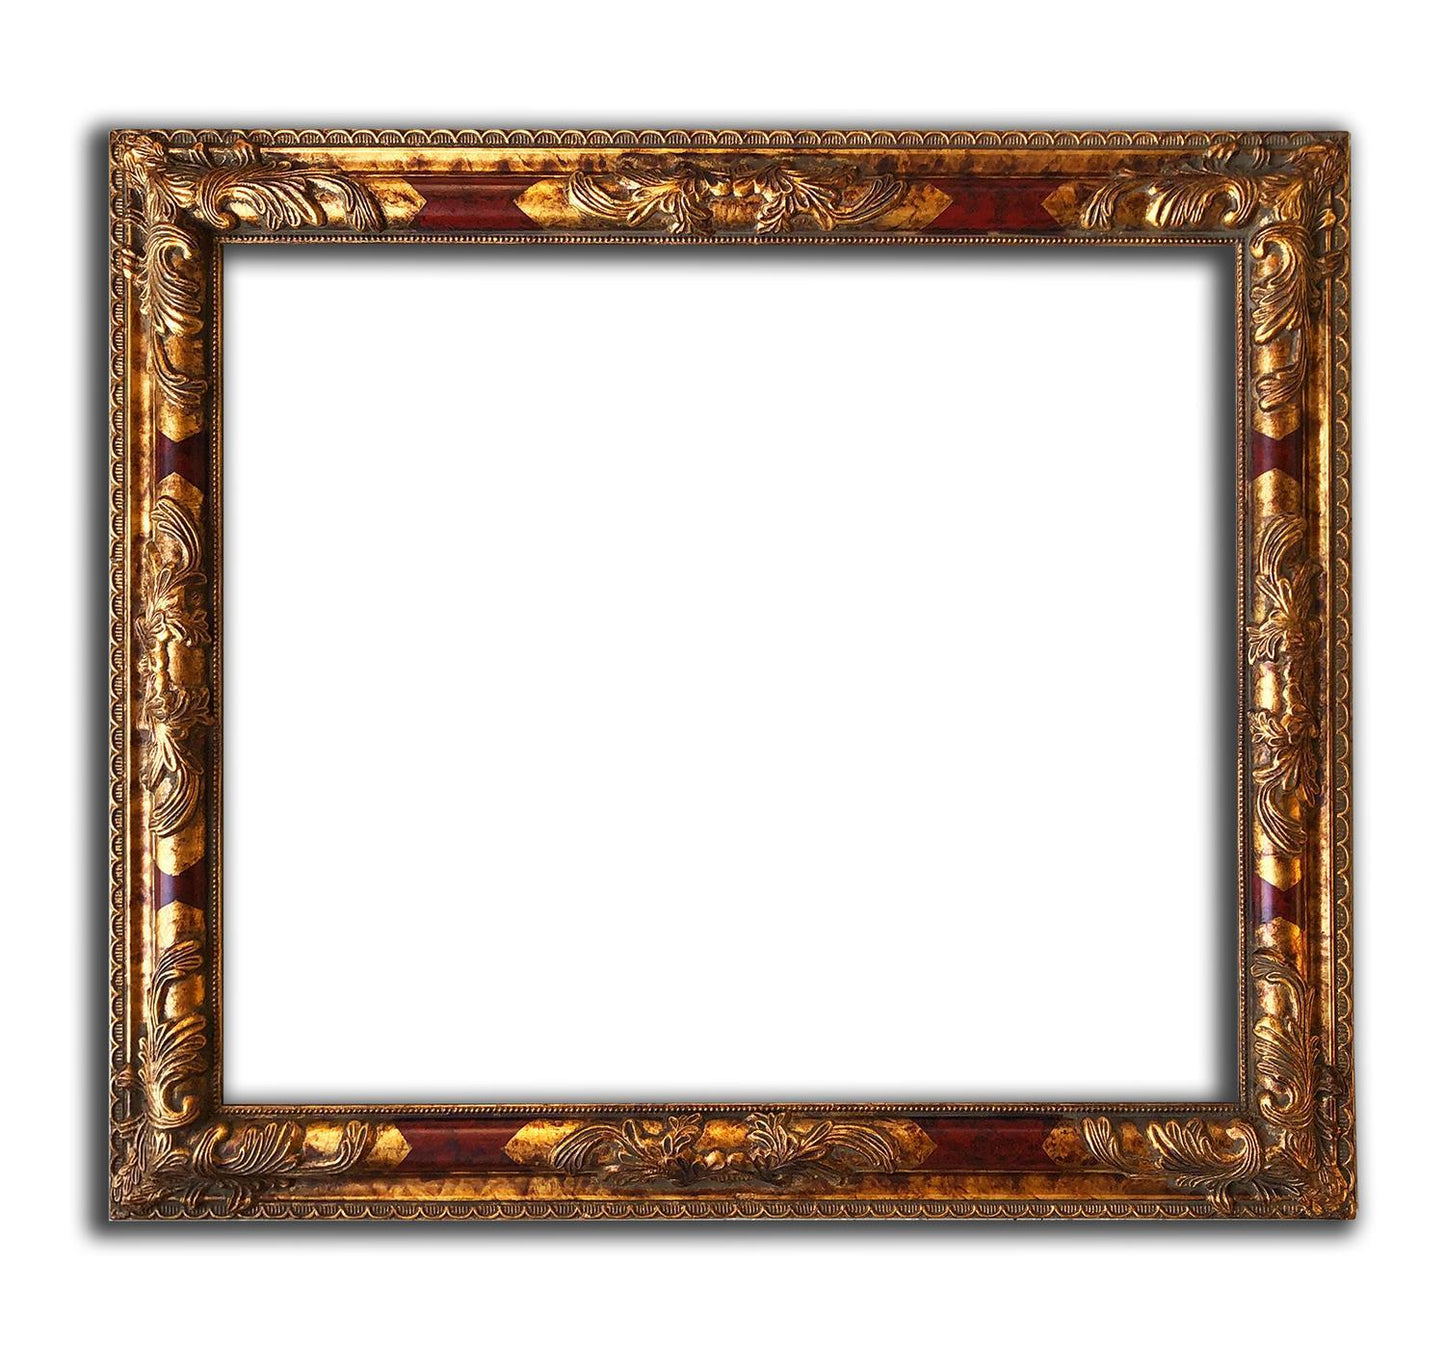 50x60 cm or 20x24 ins, wooden photo frame